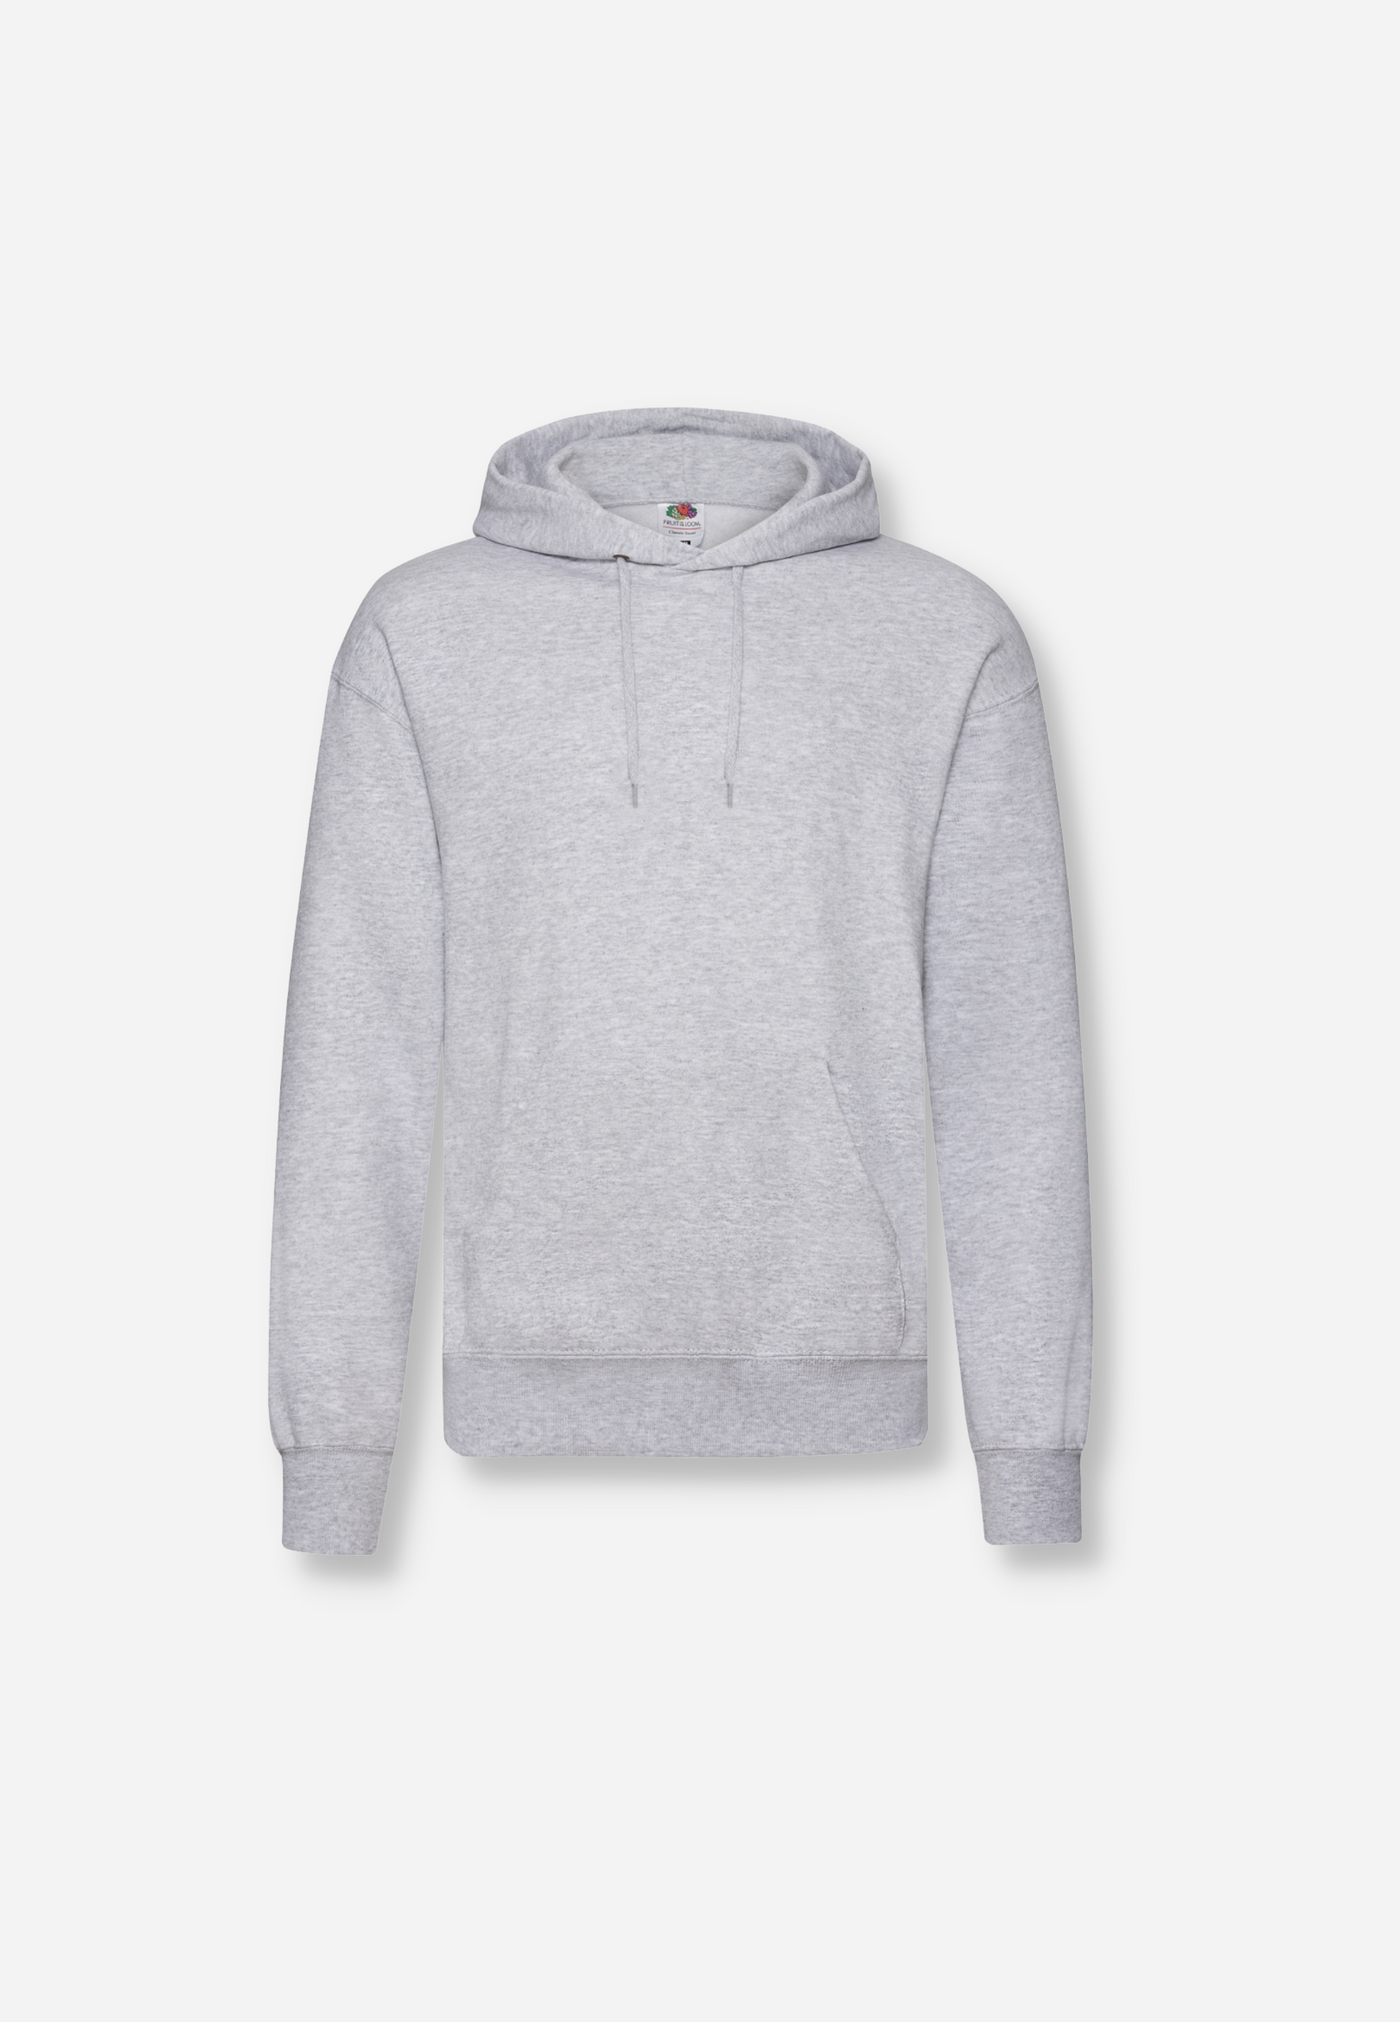 CLASSIC HOODED - HEATHER GREY